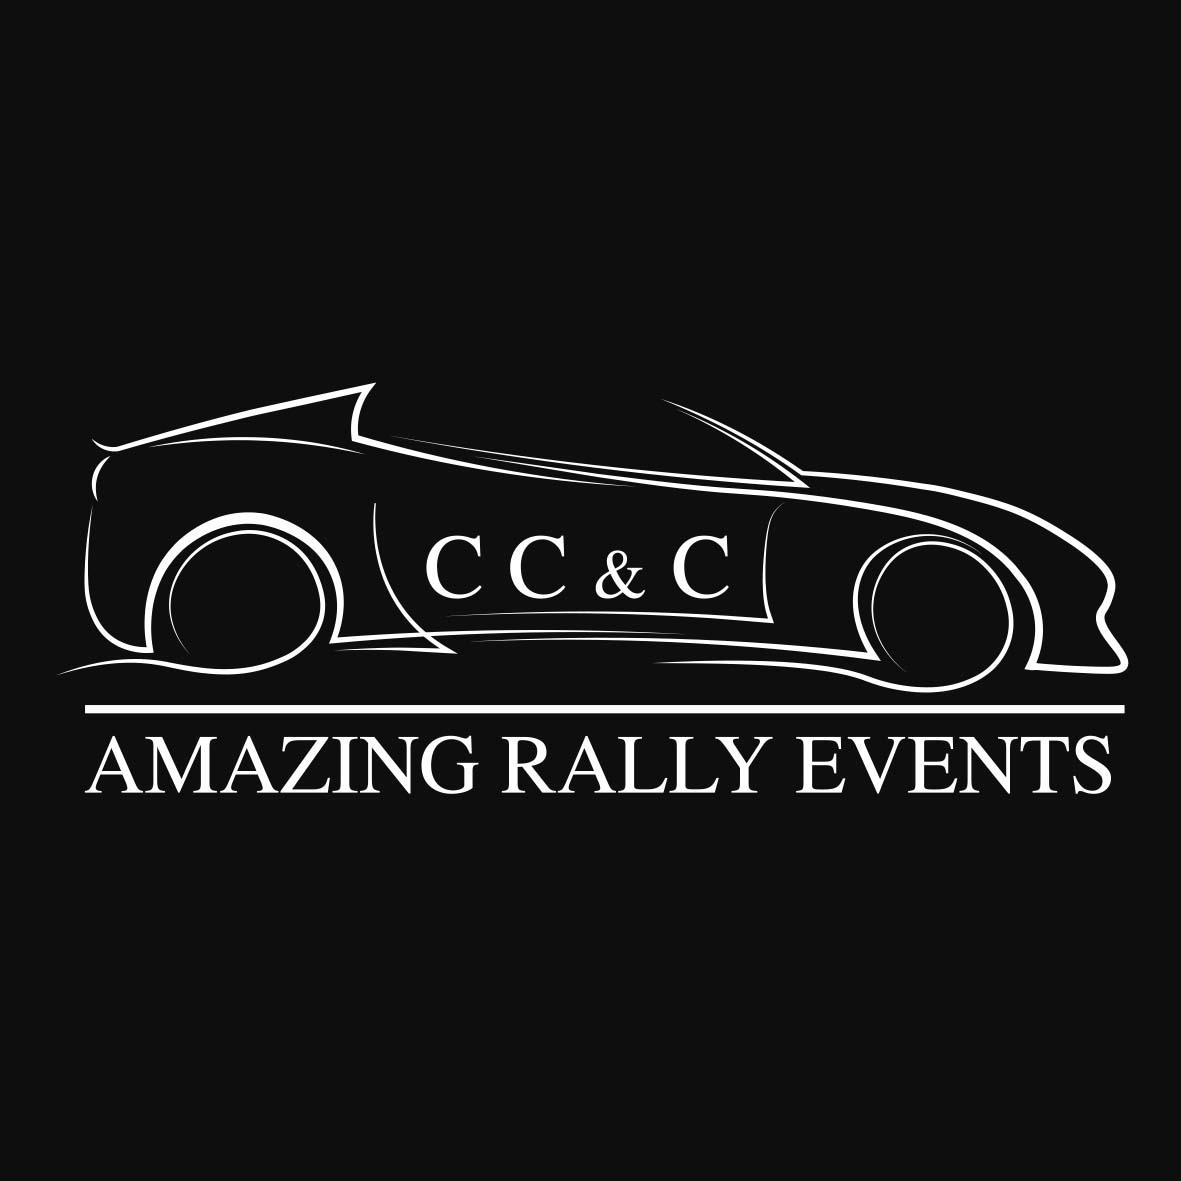 CCC-Rally Cool, Cabrio, Classic Car Rally Events